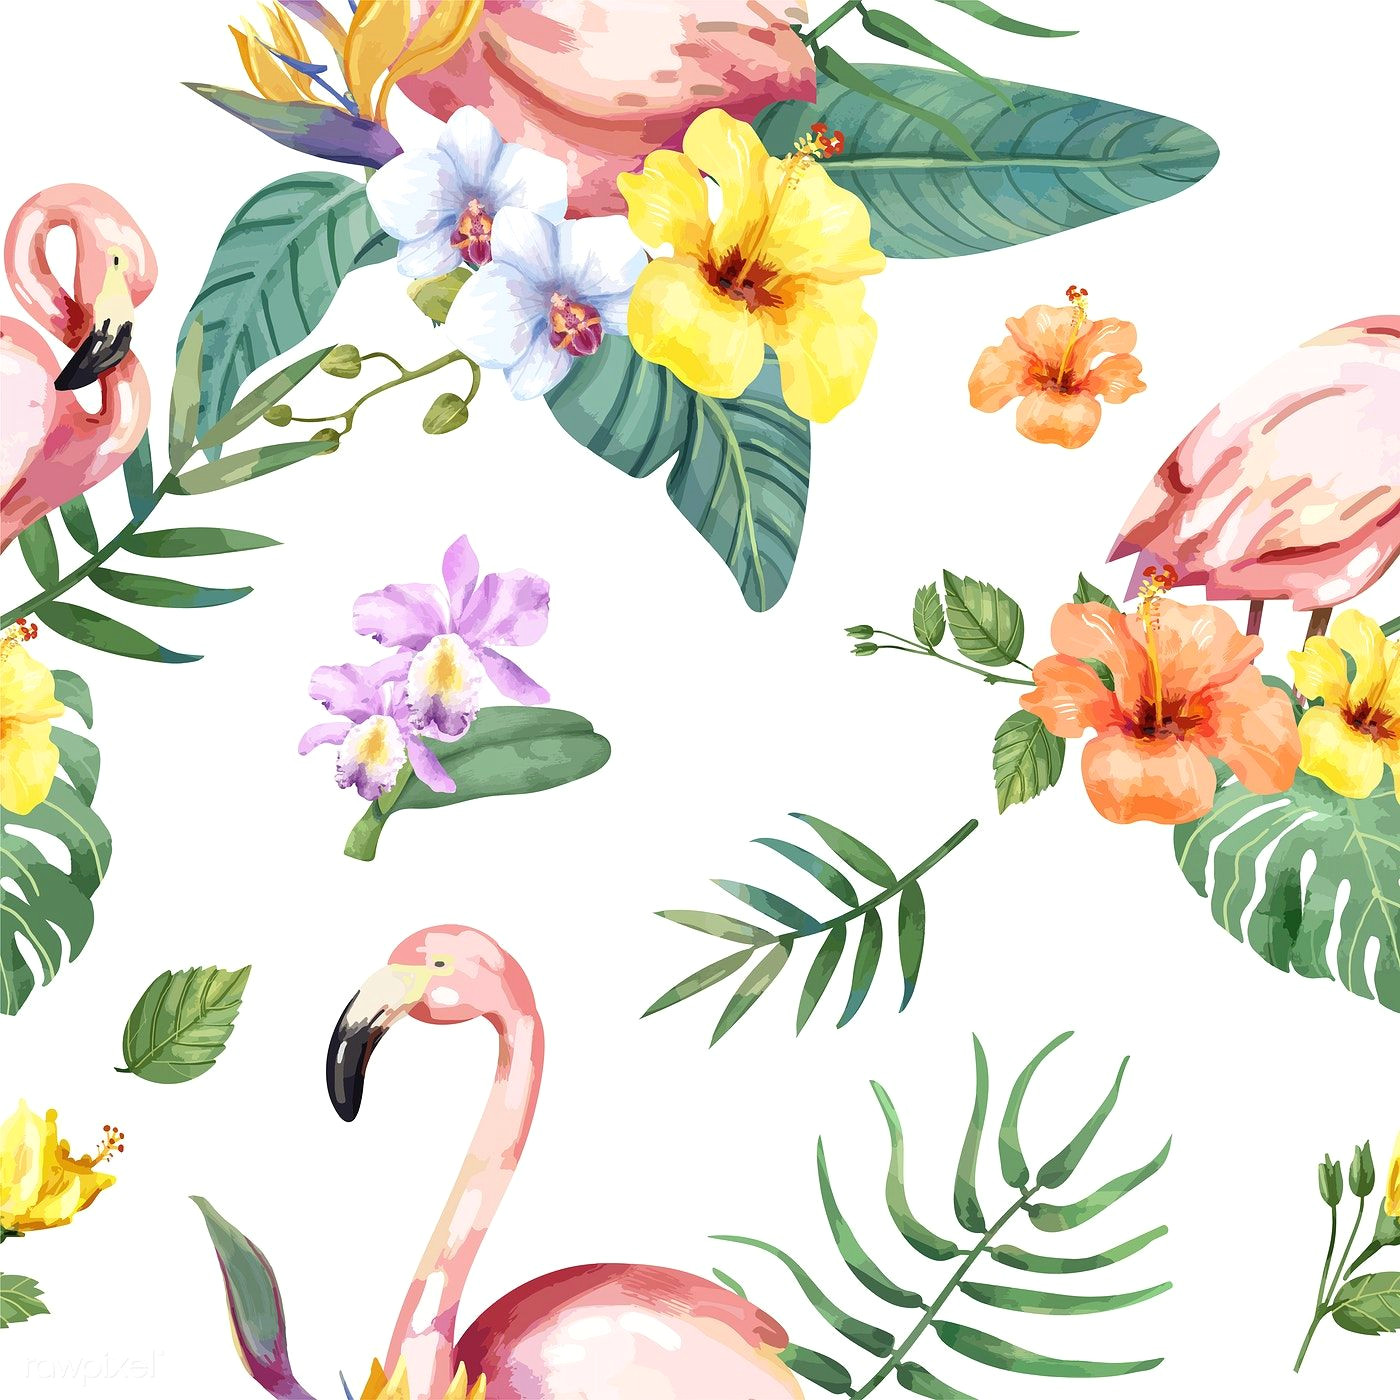 Drawing Of Tropical Flowers Hand Drawn Flamingo Bird with Tropical Flowers Premium Image by